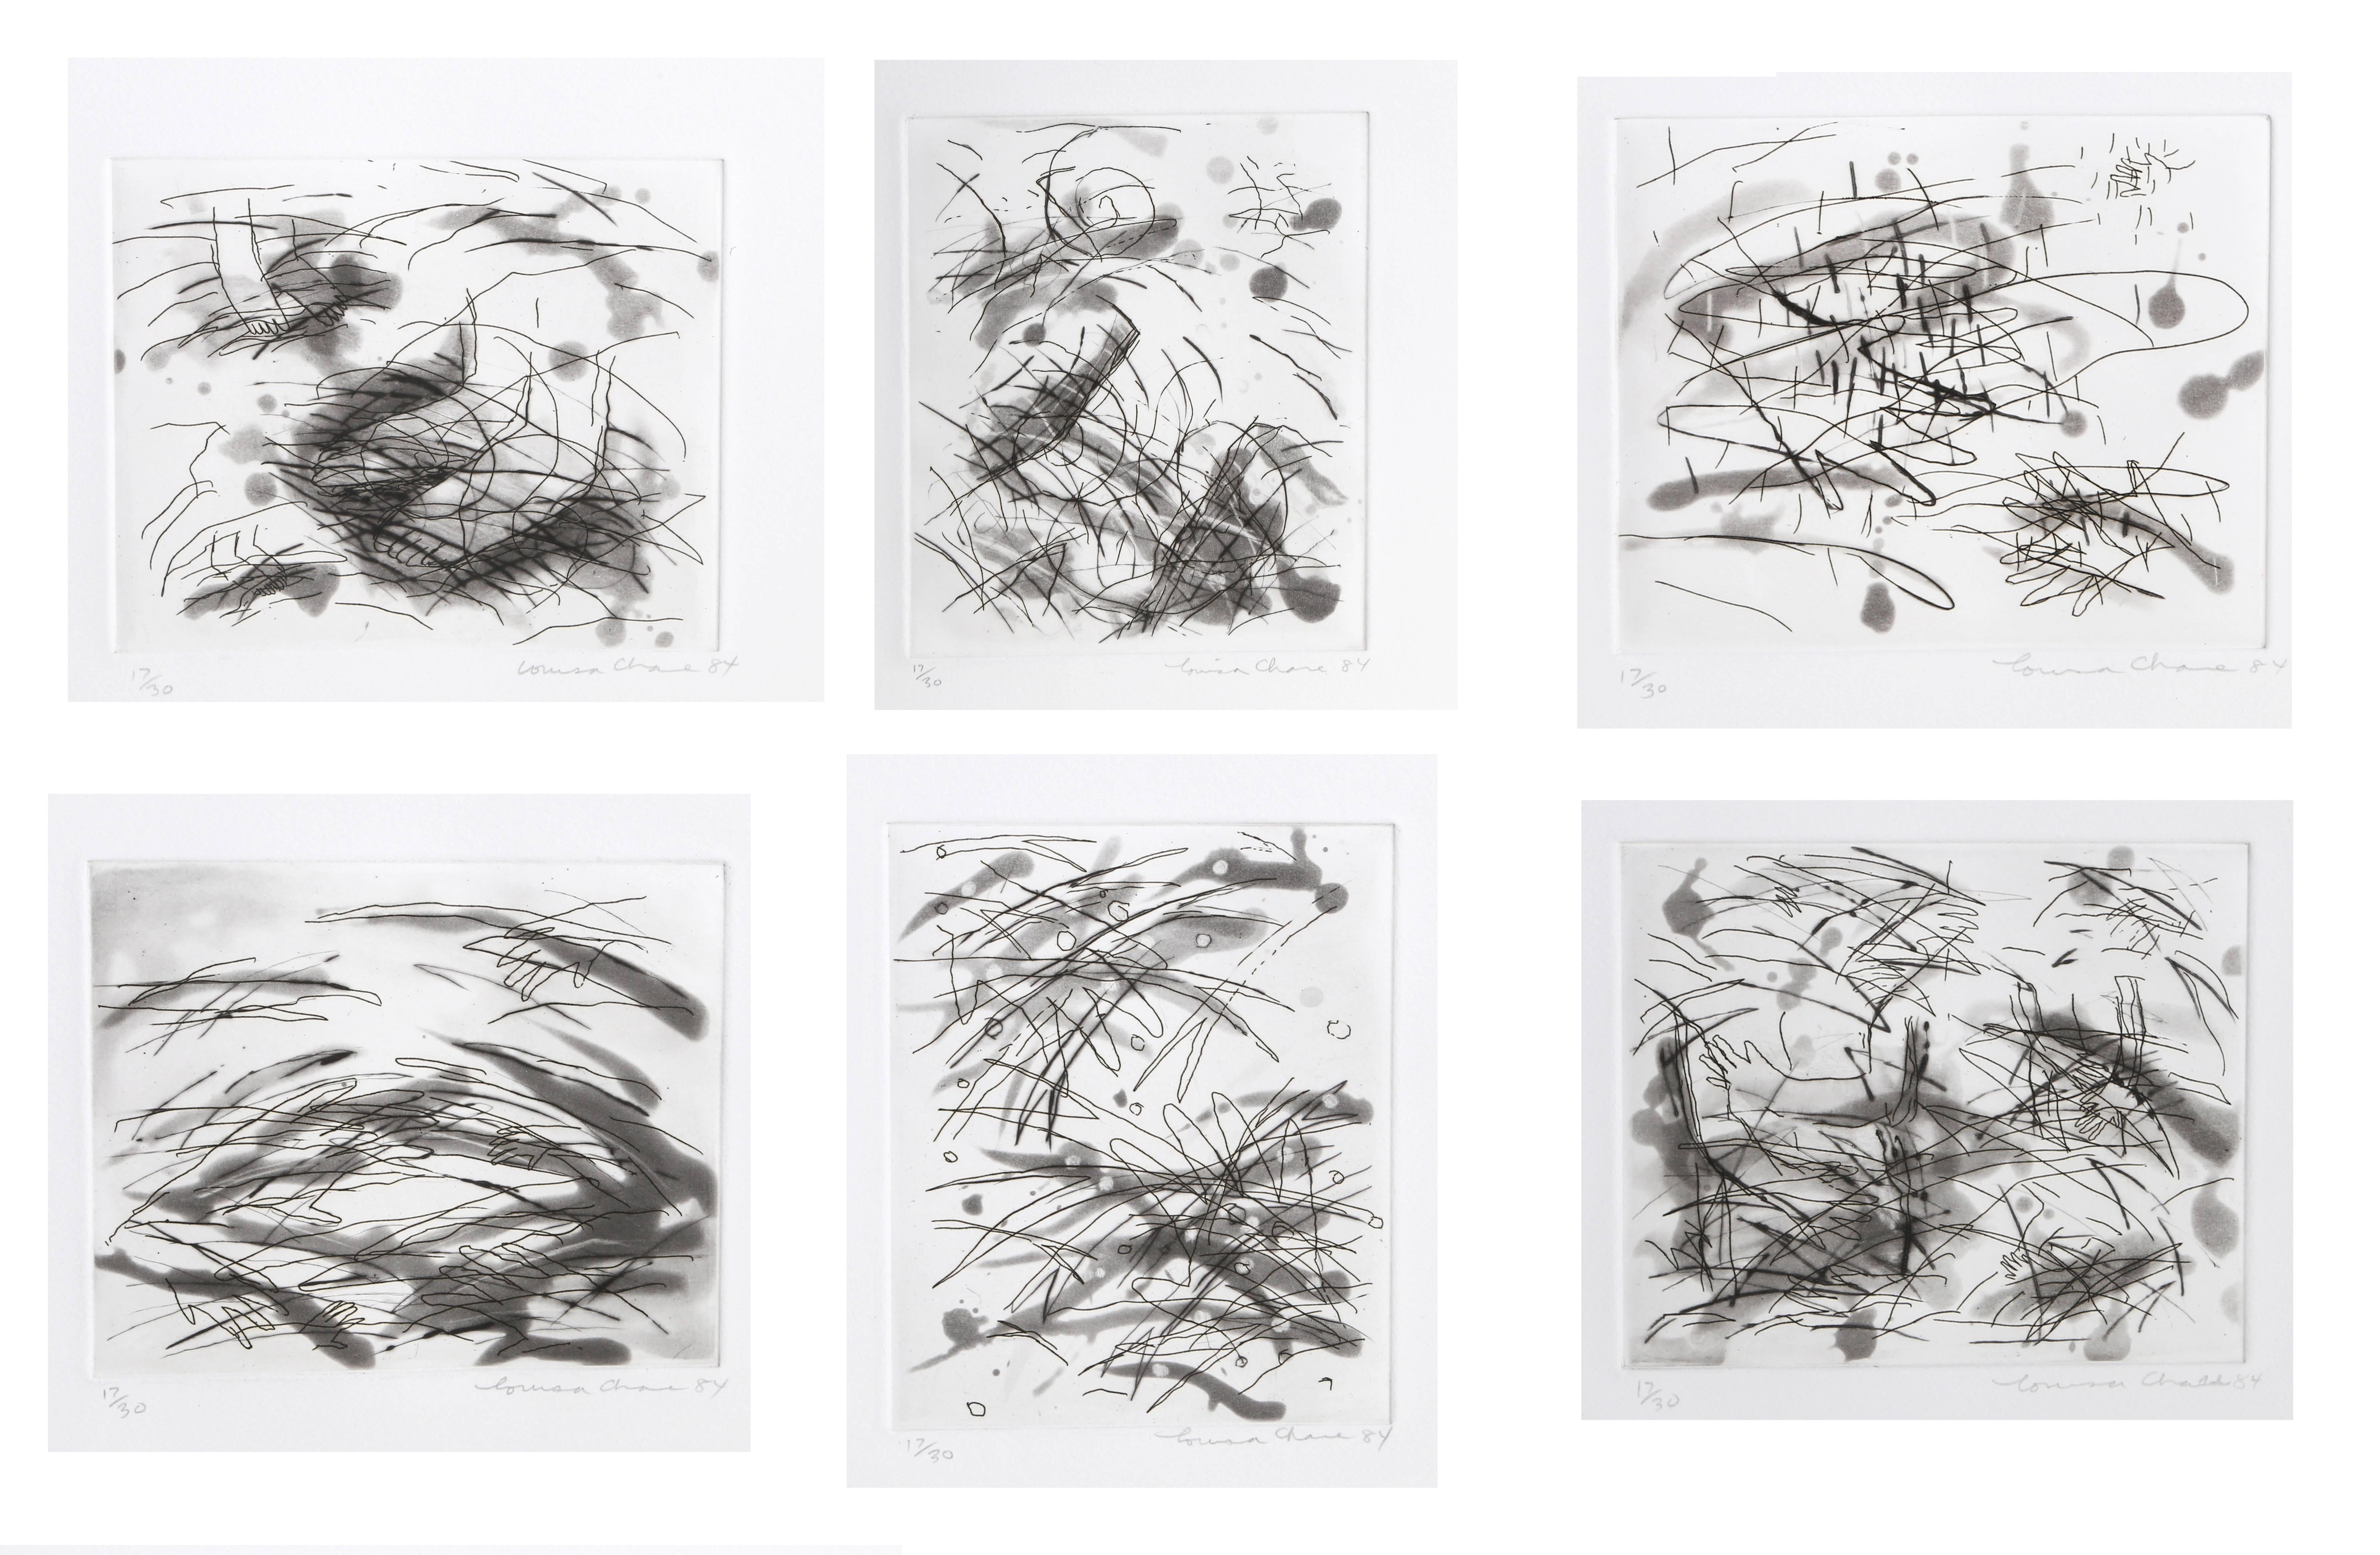 Artist: Louisa Chase, American (1951 - 2016)
Title: Portfolio of Six Etchings 
Year: 1984
Medium: Six Drypoint Etchings with Aquatint, Signed and Numbered in Pencil
Edition: 30
Paper Size: 11 x 11 in. (27.94 x 27.94 cm)
Book Size: 11 x 11 inches